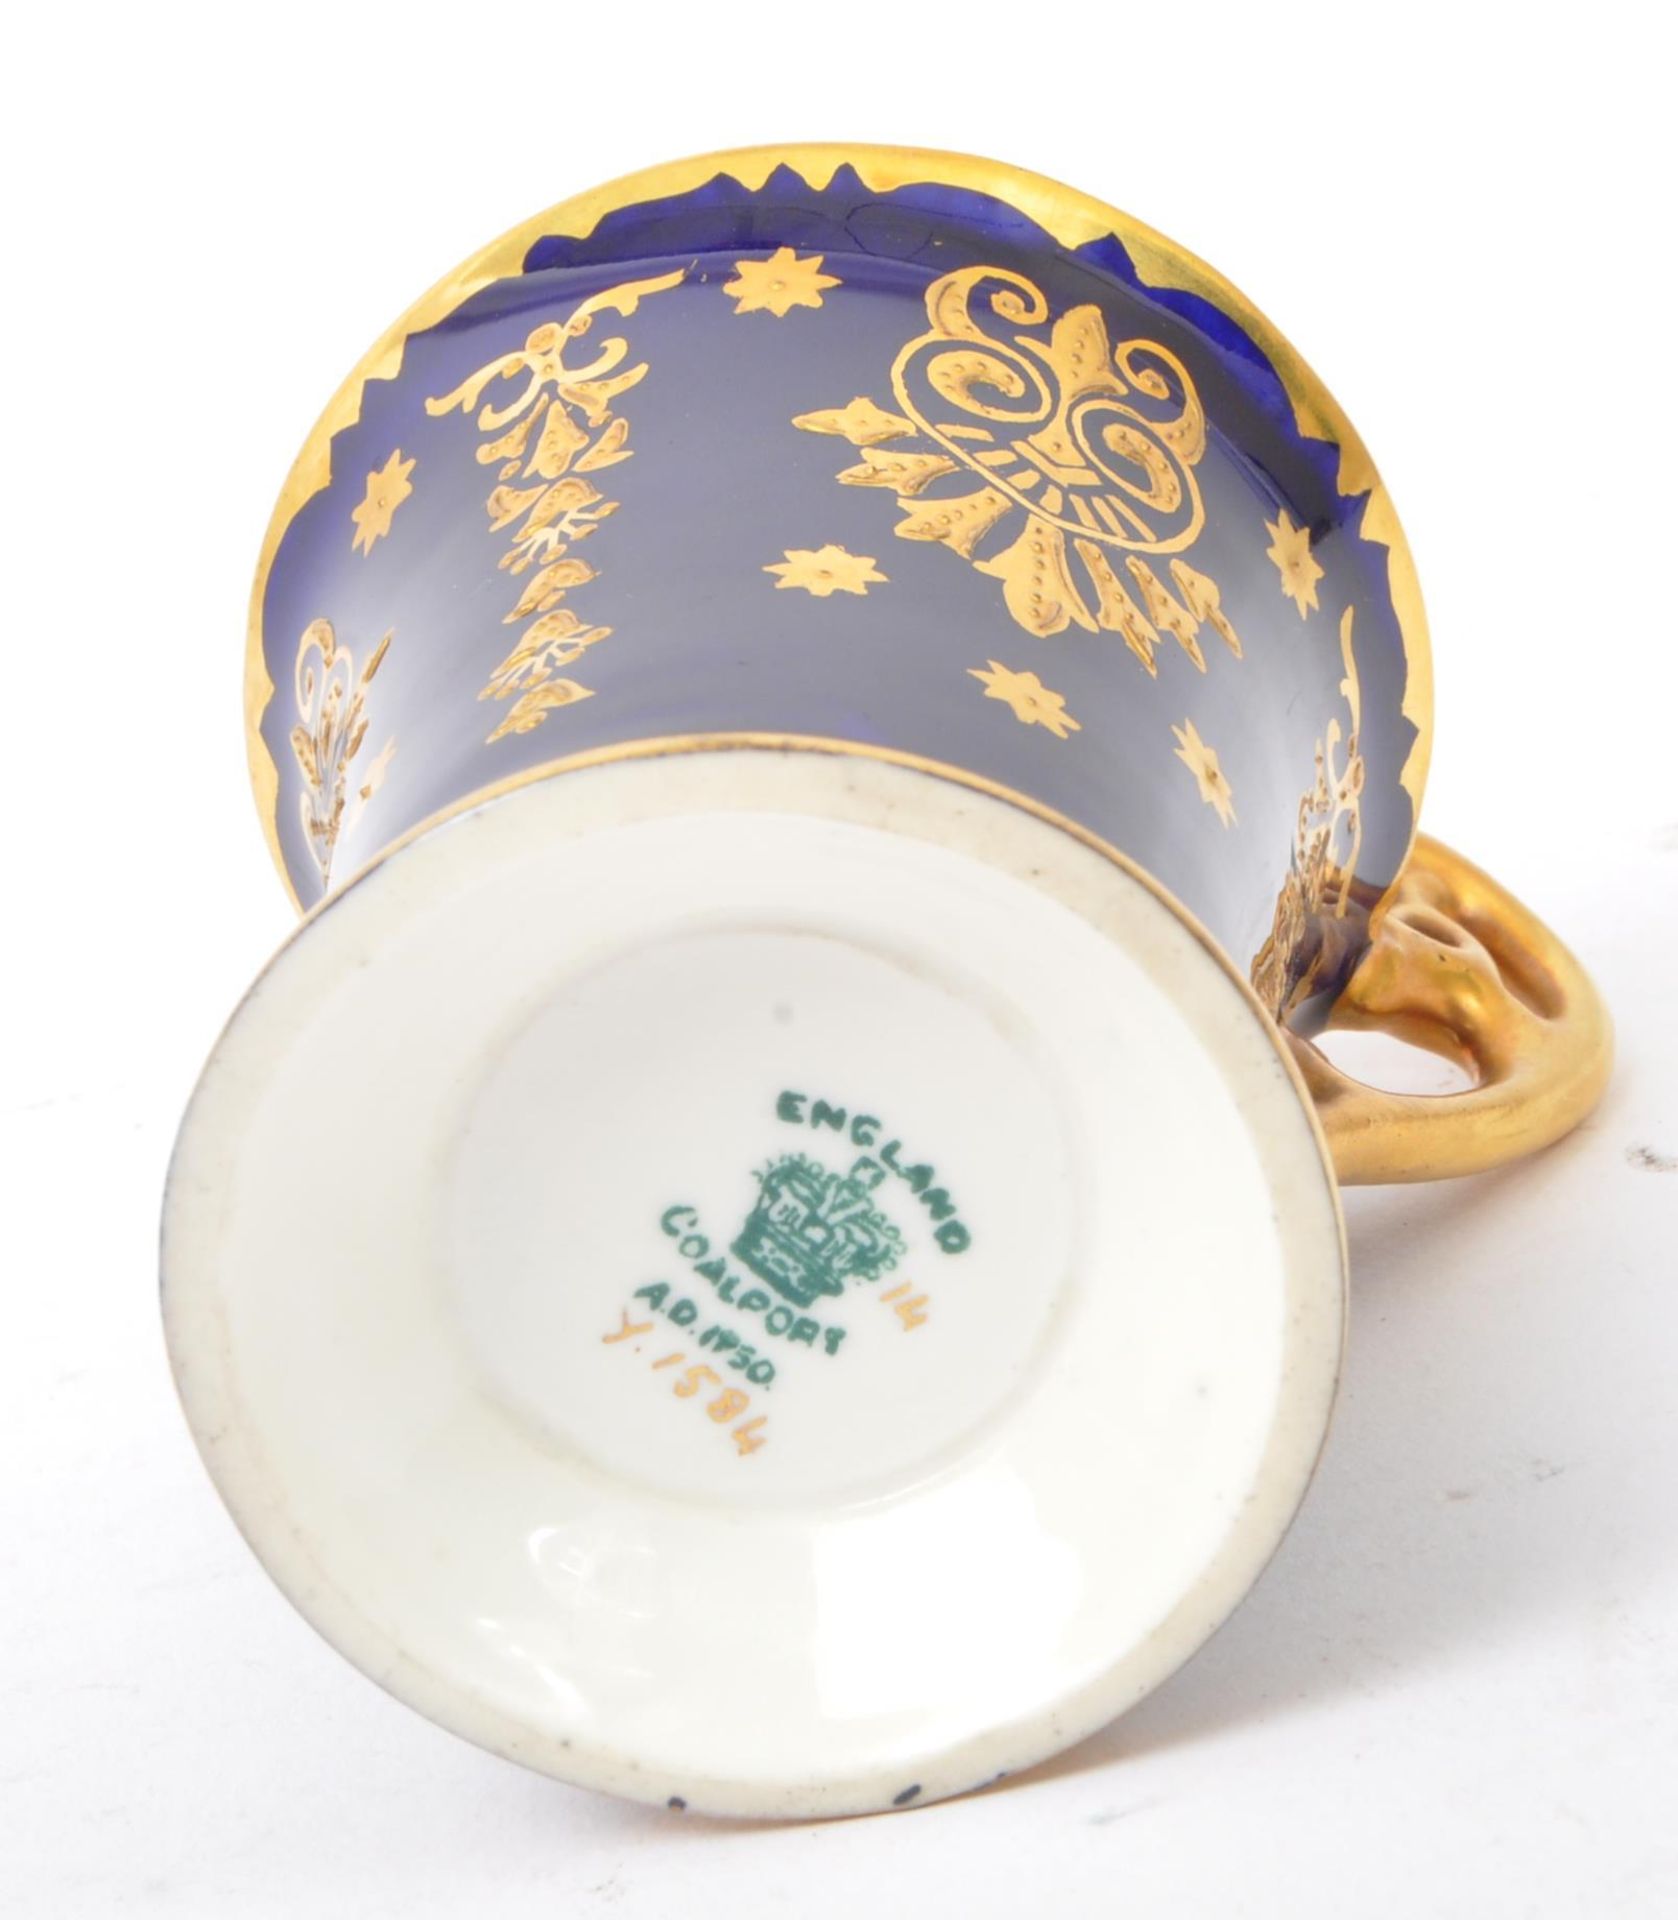 EARLY 20TH CENTURY COALPORT DEMITASSE CHOCOLATE CUP & SAUCER - Image 5 of 5